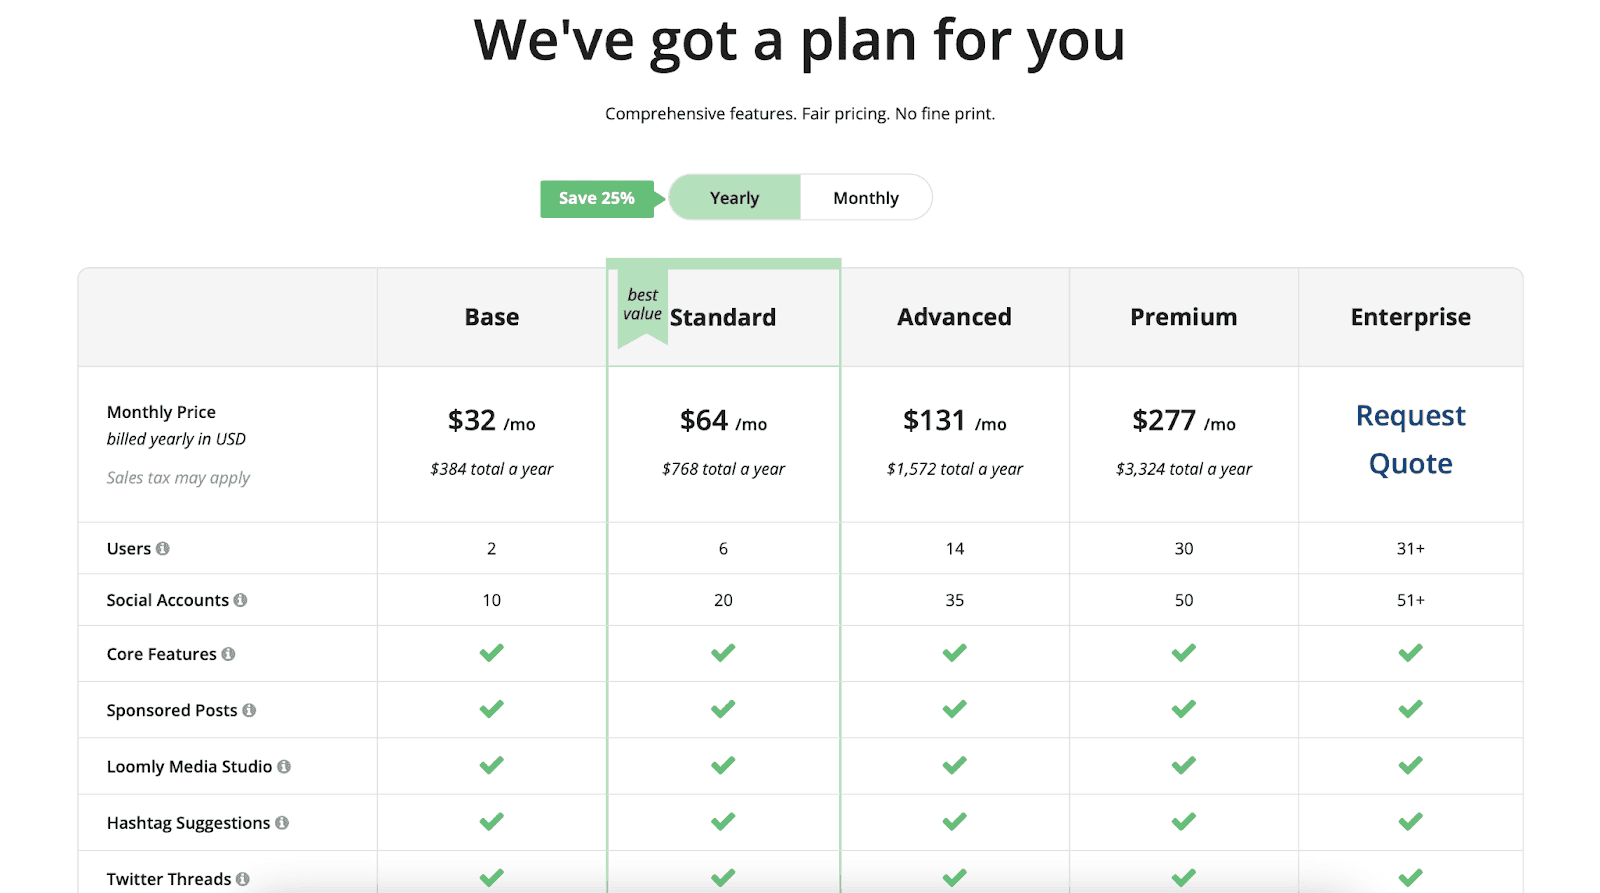 Loomly Pricing Page